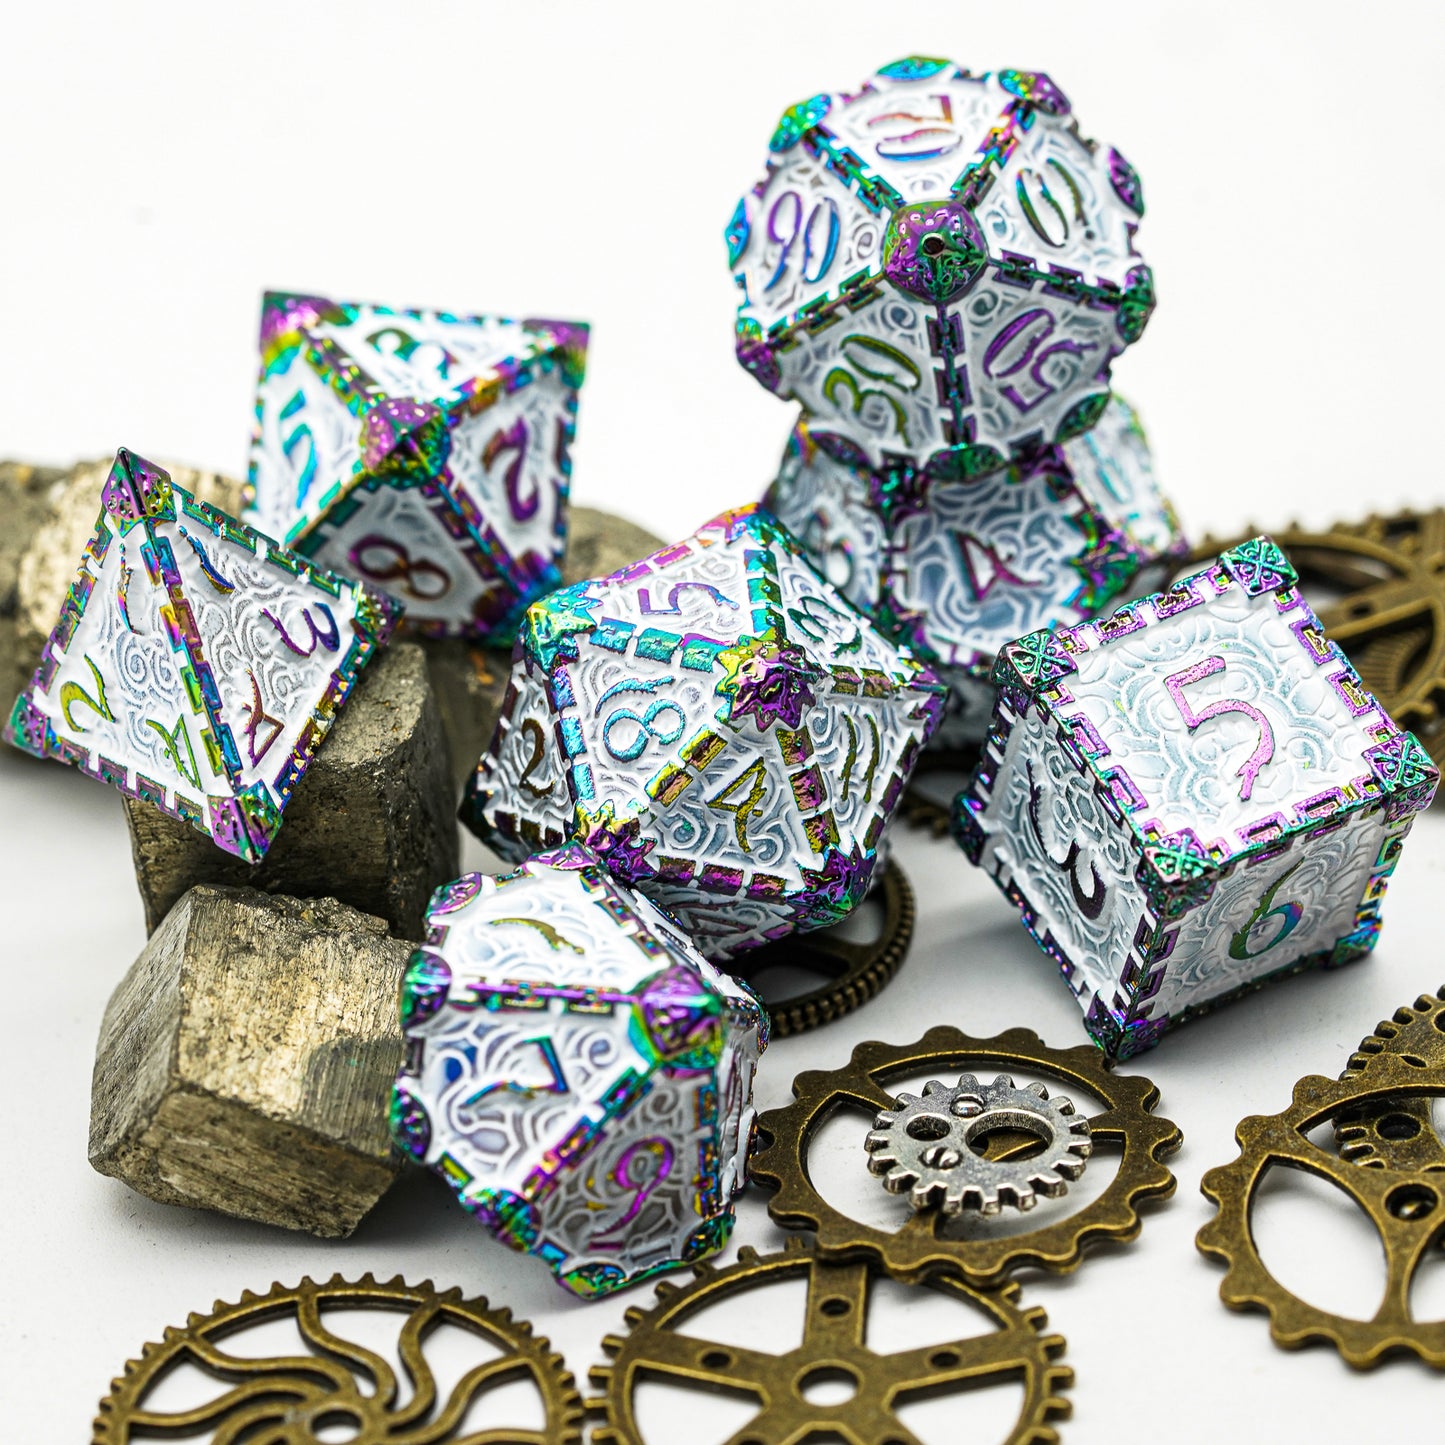 7 piece metal dagger dice set, snow blade, white and rainbow with gears and stones in foreground